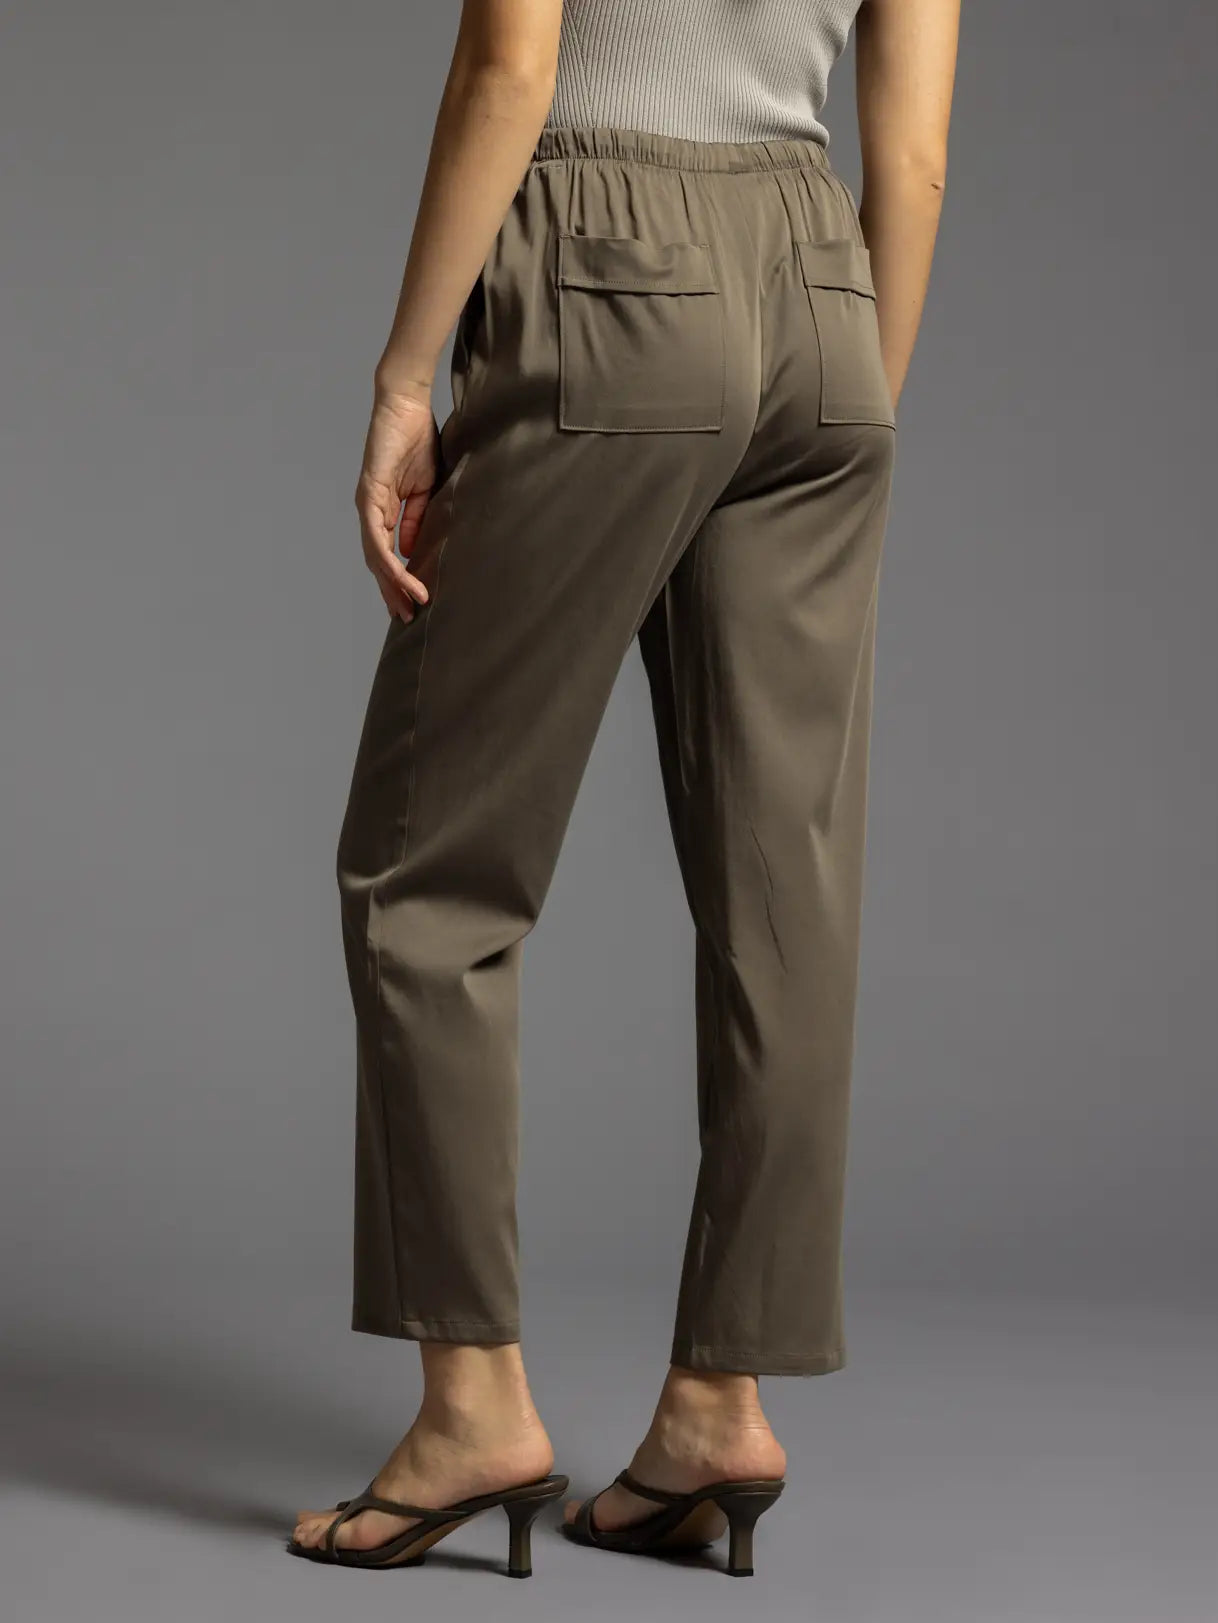 Olive green pant with back pockets  and elastic tie waist.